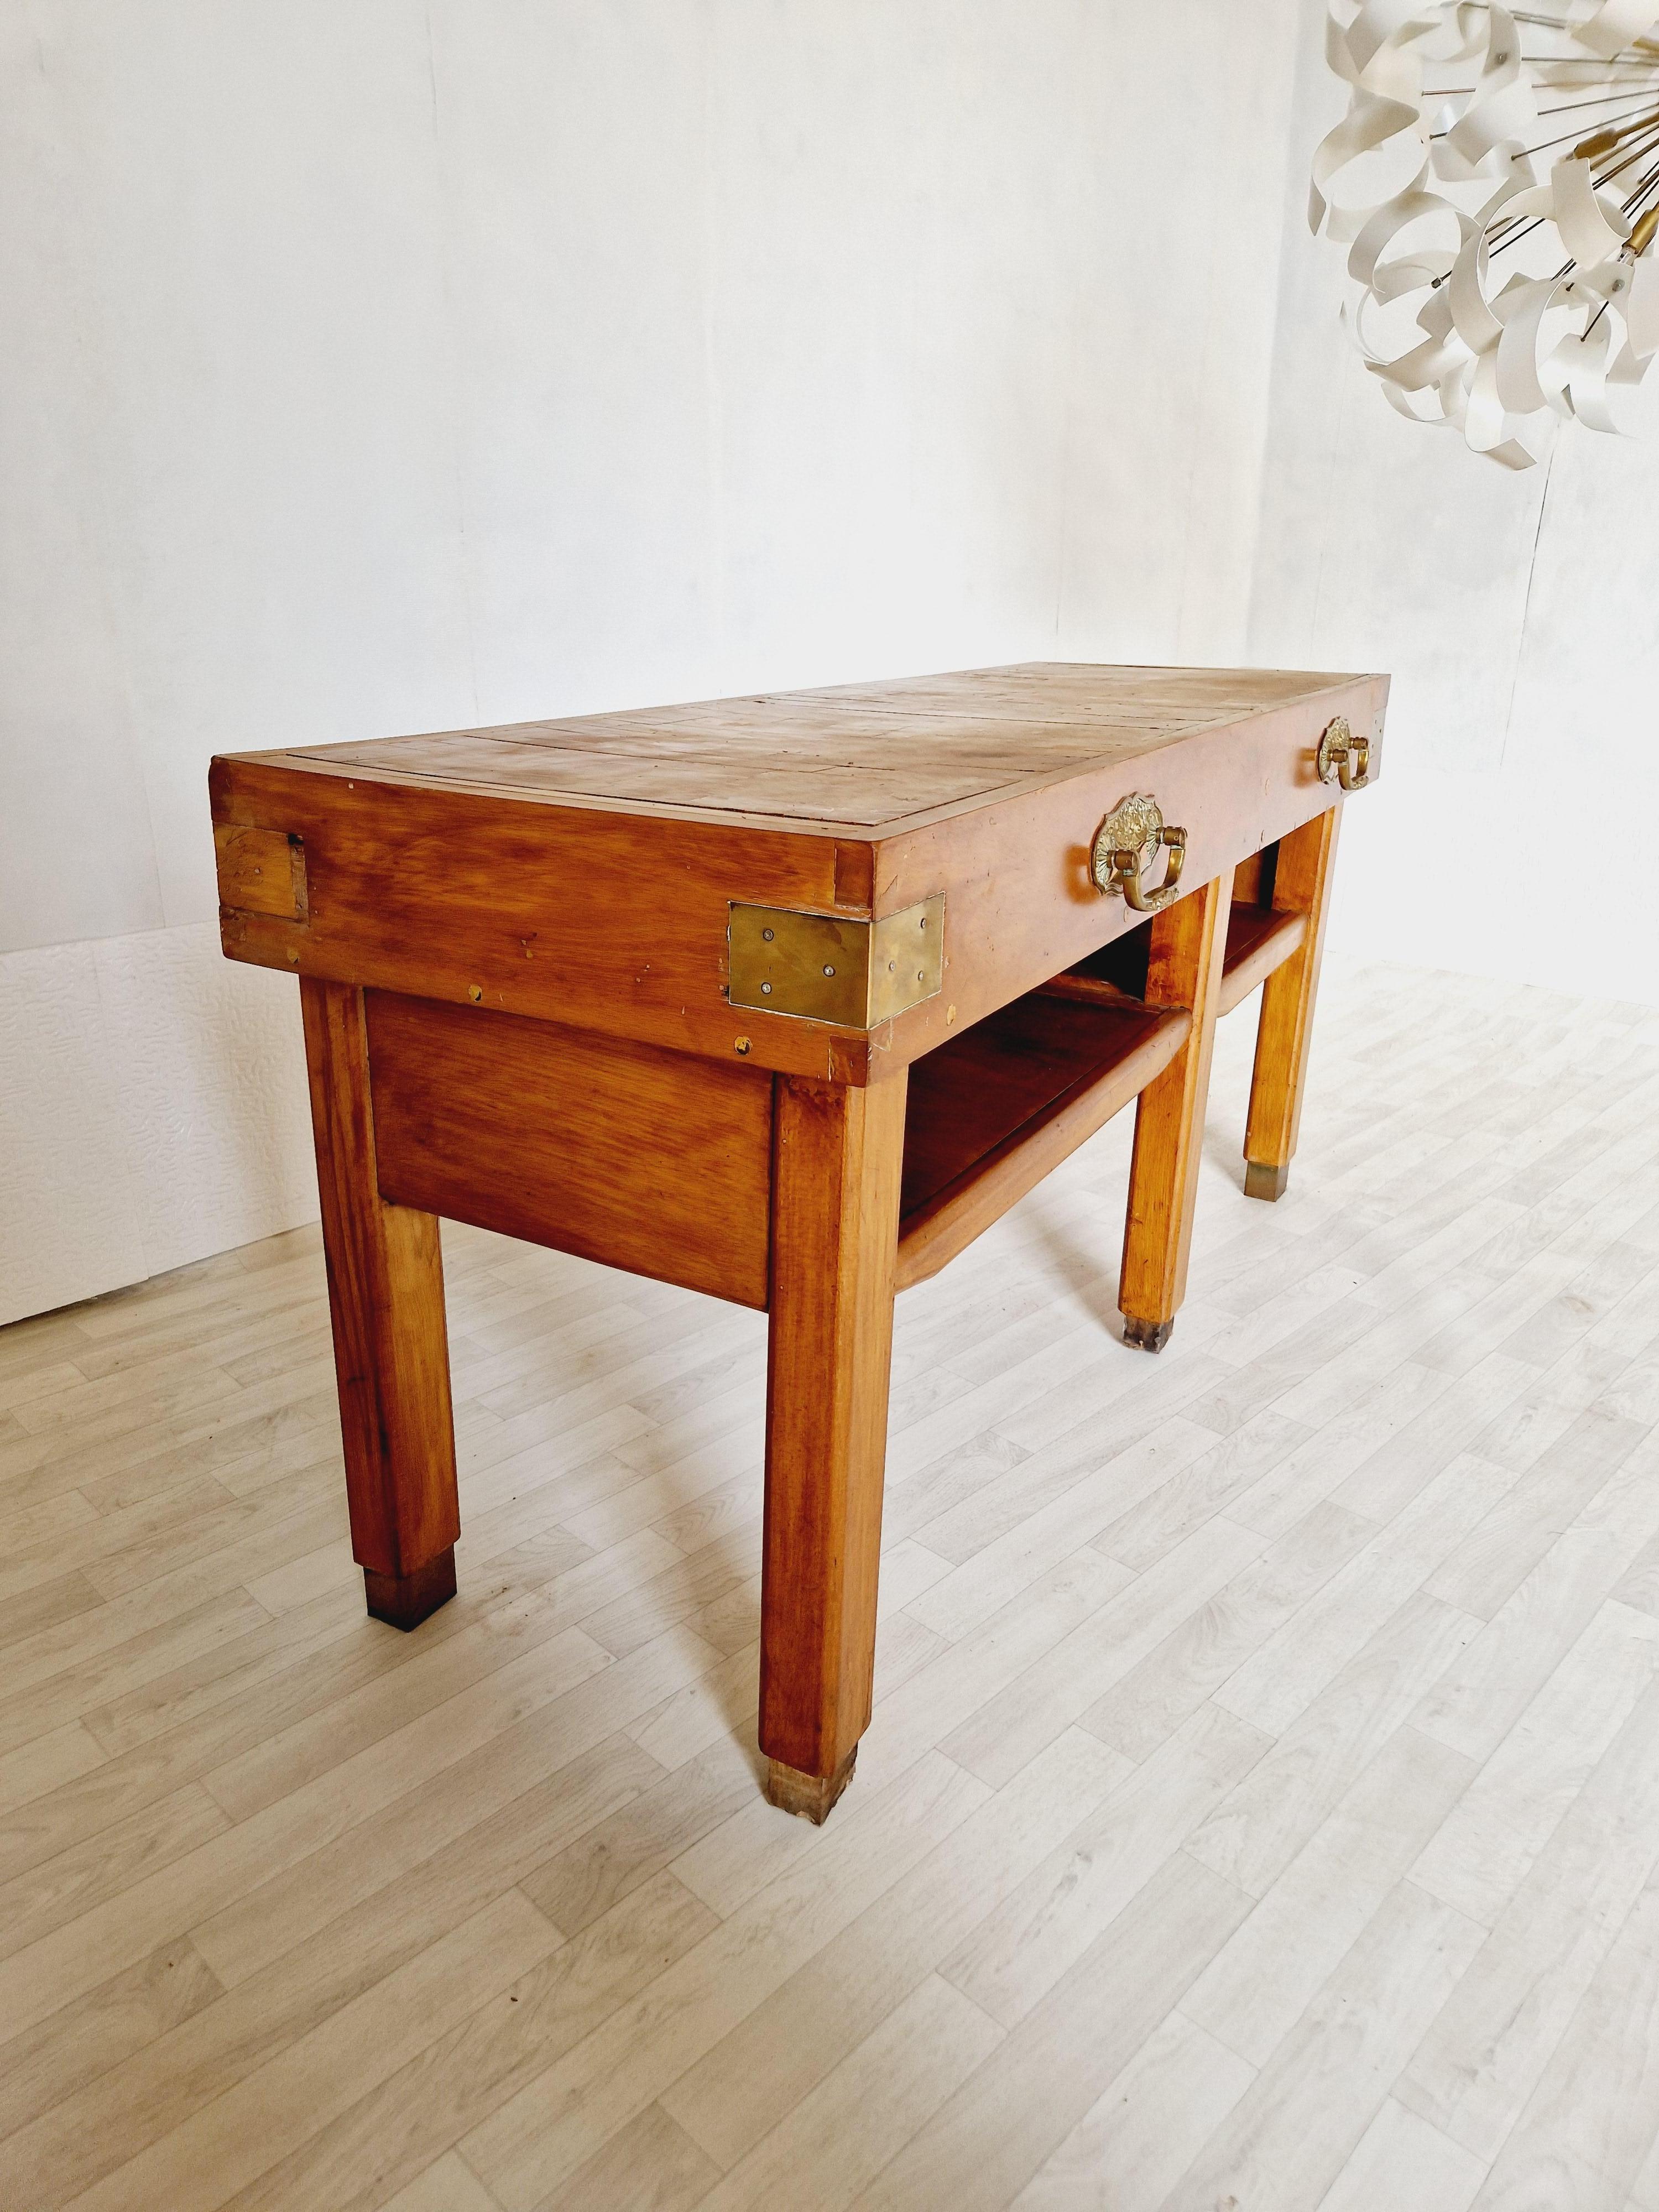 
This antique French butchers block table is an exquisite addition to any kitchen or dining area. Crafted with care in the early 20th century, this freestanding kitchen island features a sturdy pine worktop, measuring 175cm in length and 20cm in